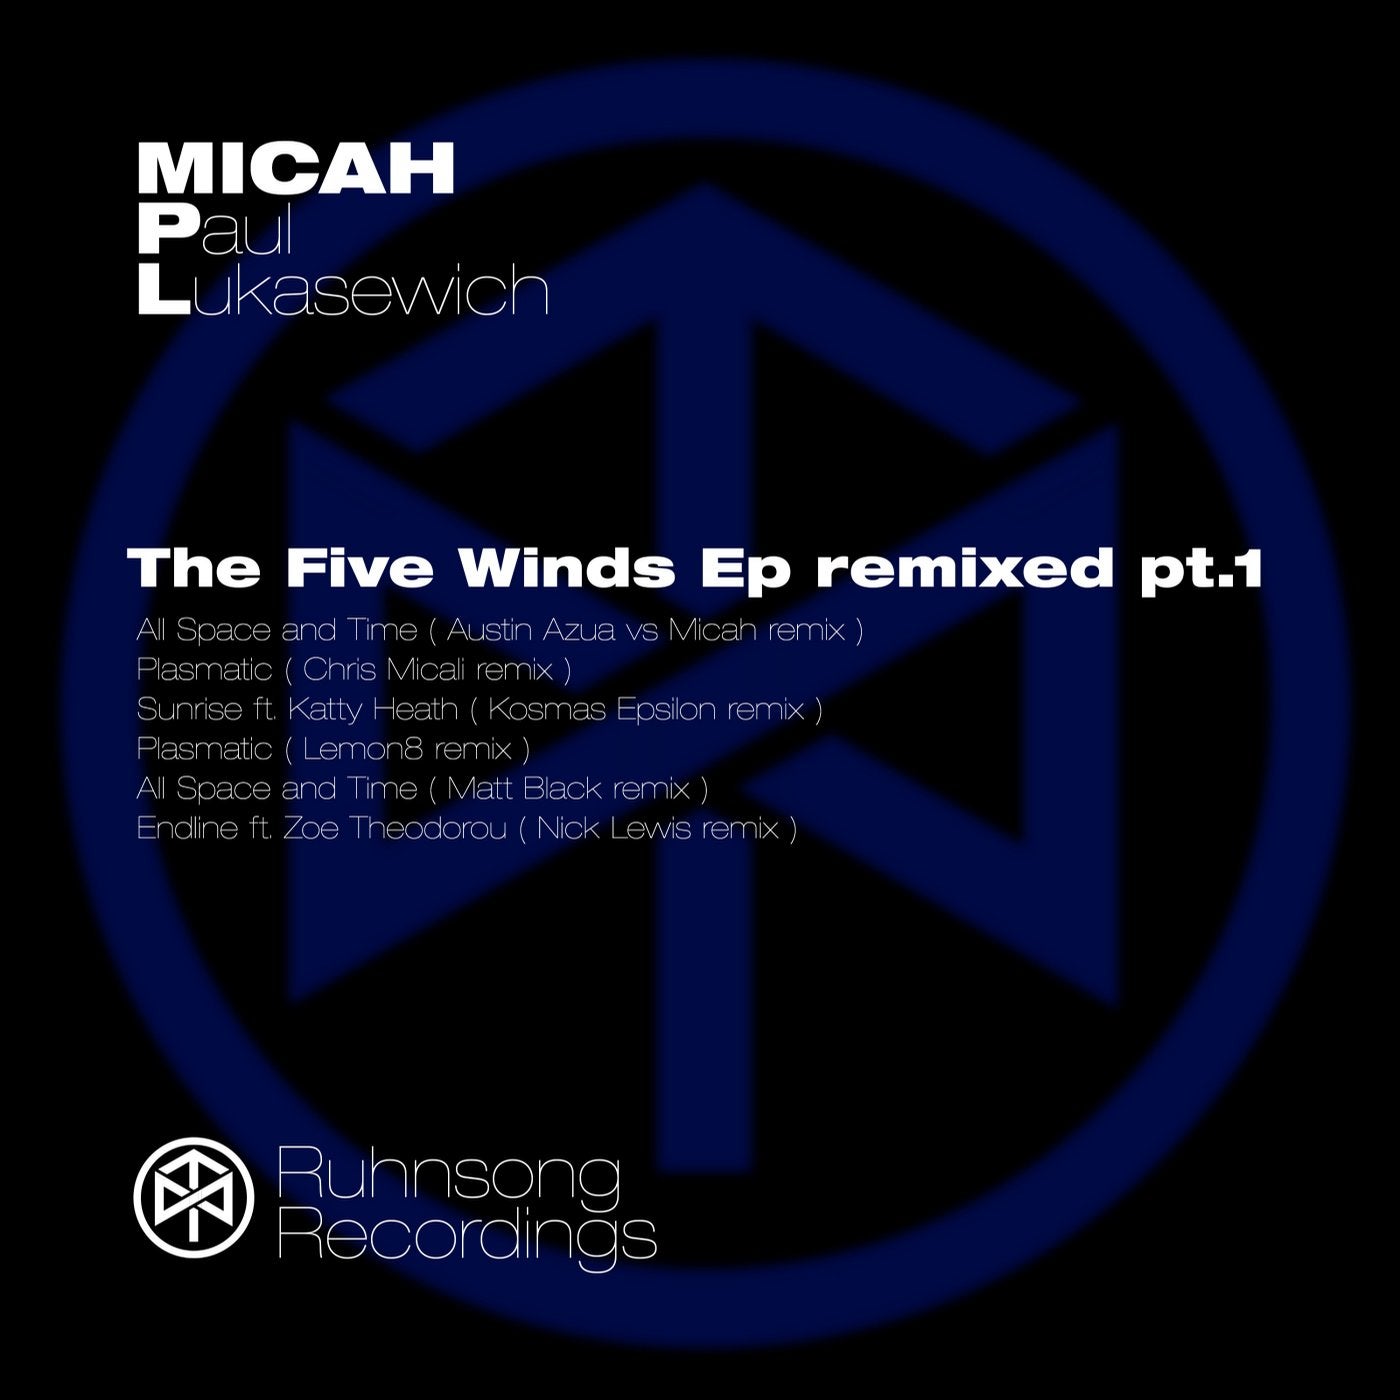 The Five Winds Remixed, Pt. 1